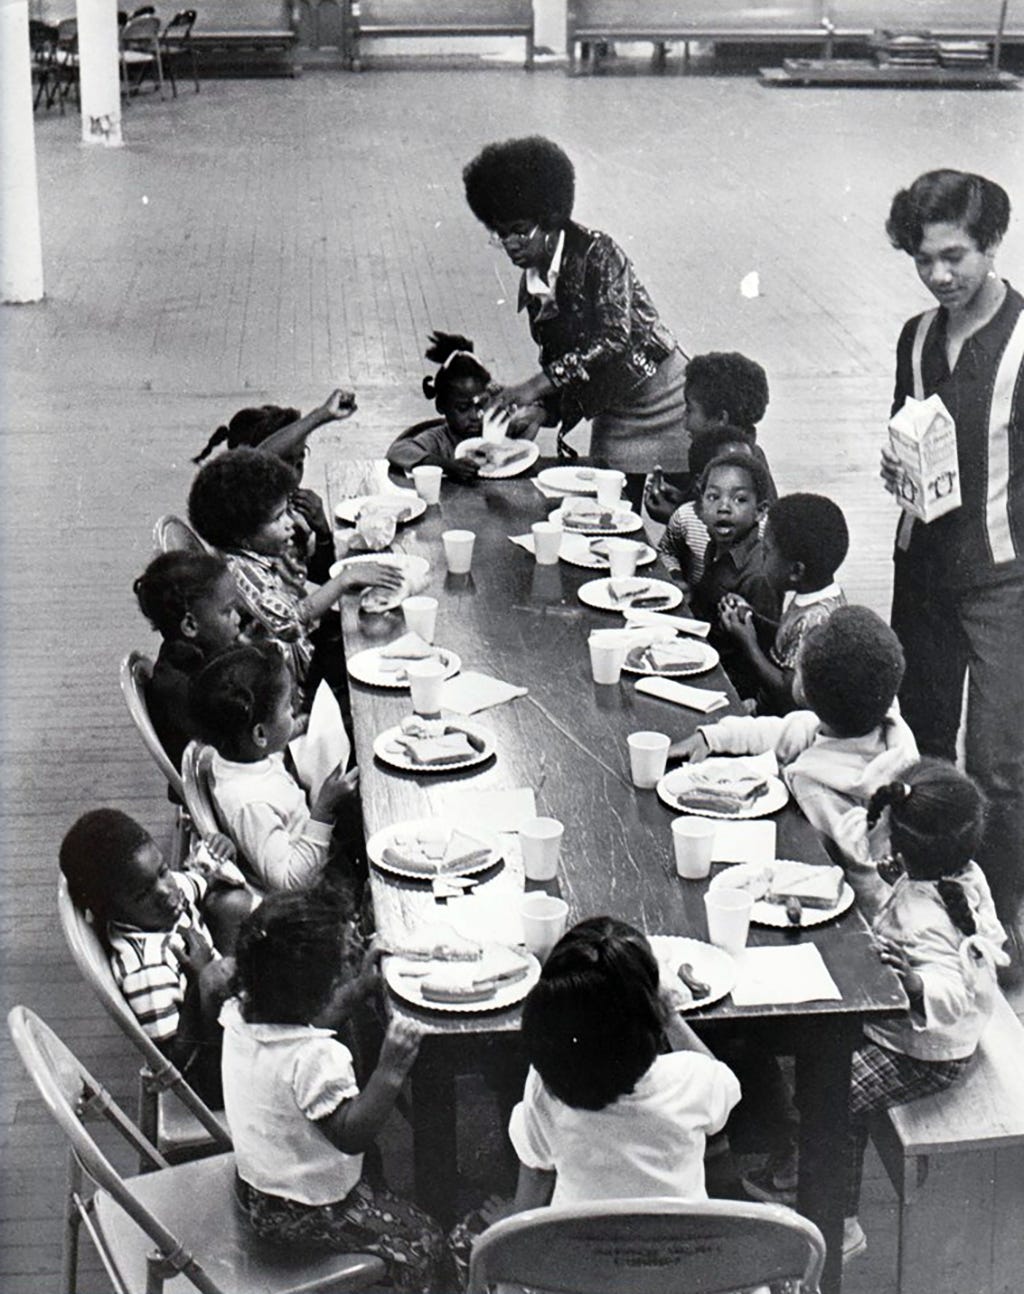 a group of Black children sit at a table eating free breakfast. a Black woman helps a young girl pick up her plate.